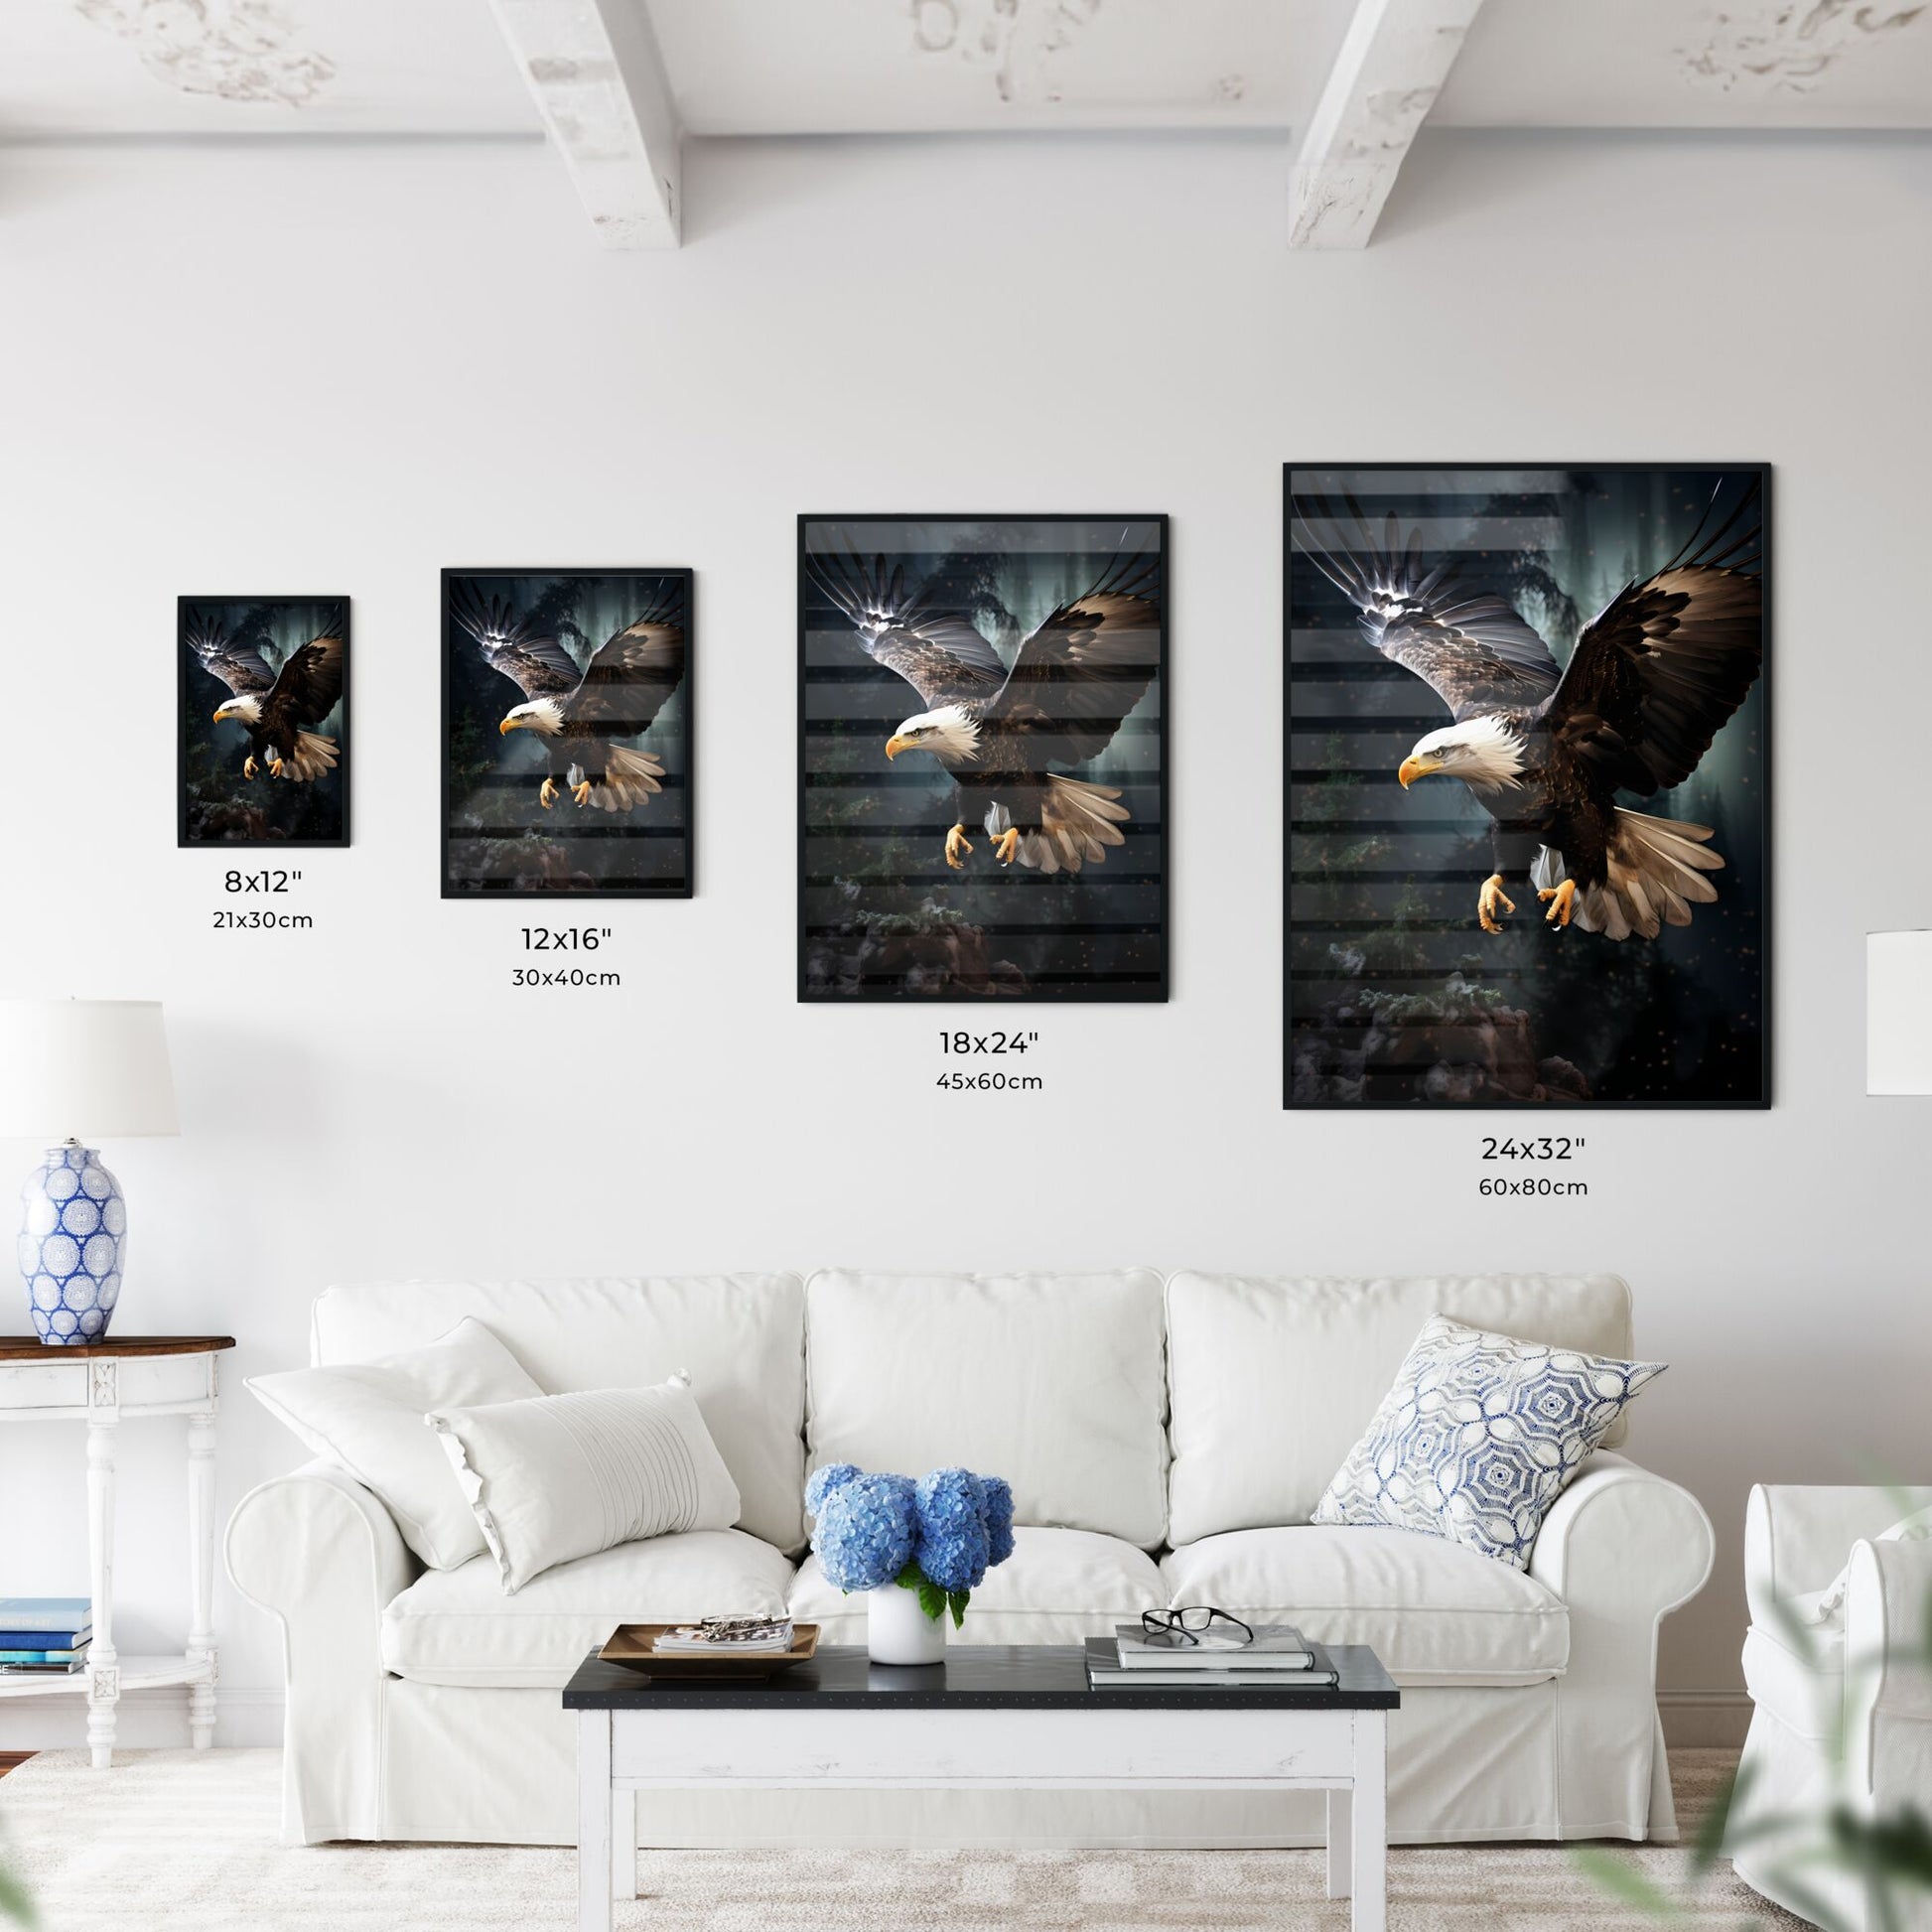 A Poster of An eagle flying upward - A Bald Eagle Flying In The Air Default Title